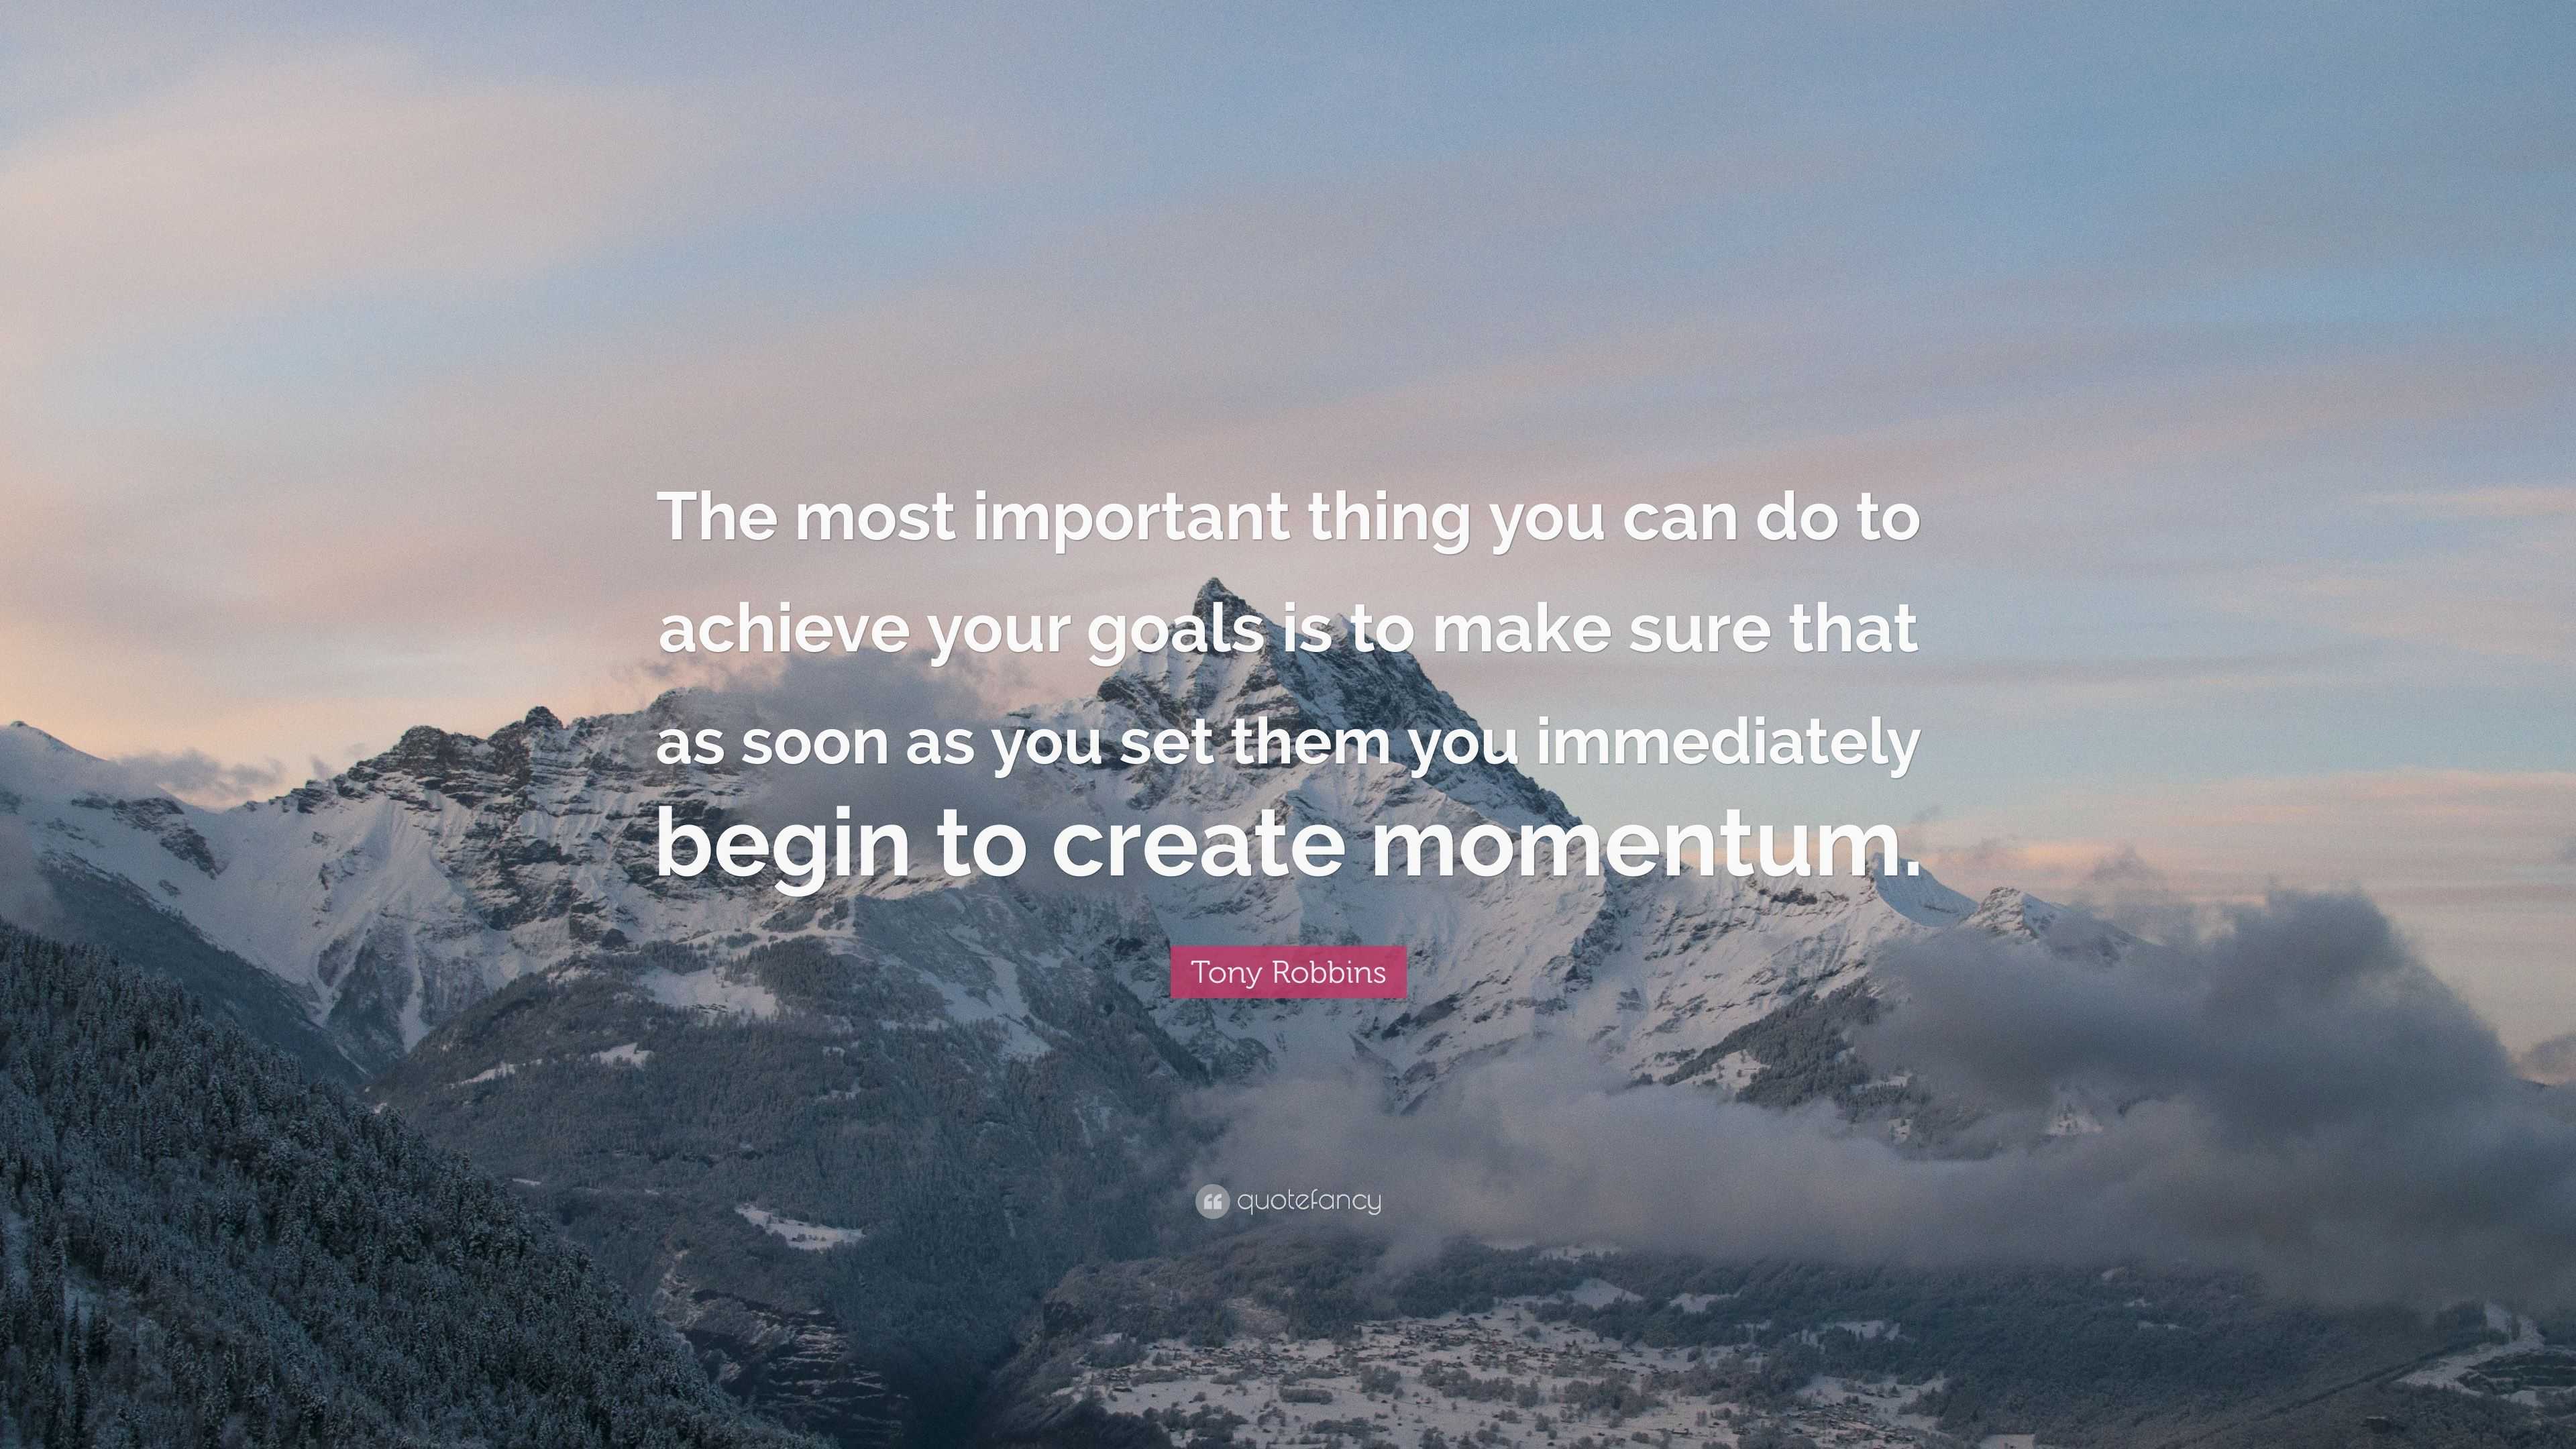 Tony Robbins Quote: “The most important thing you can do to achieve ...